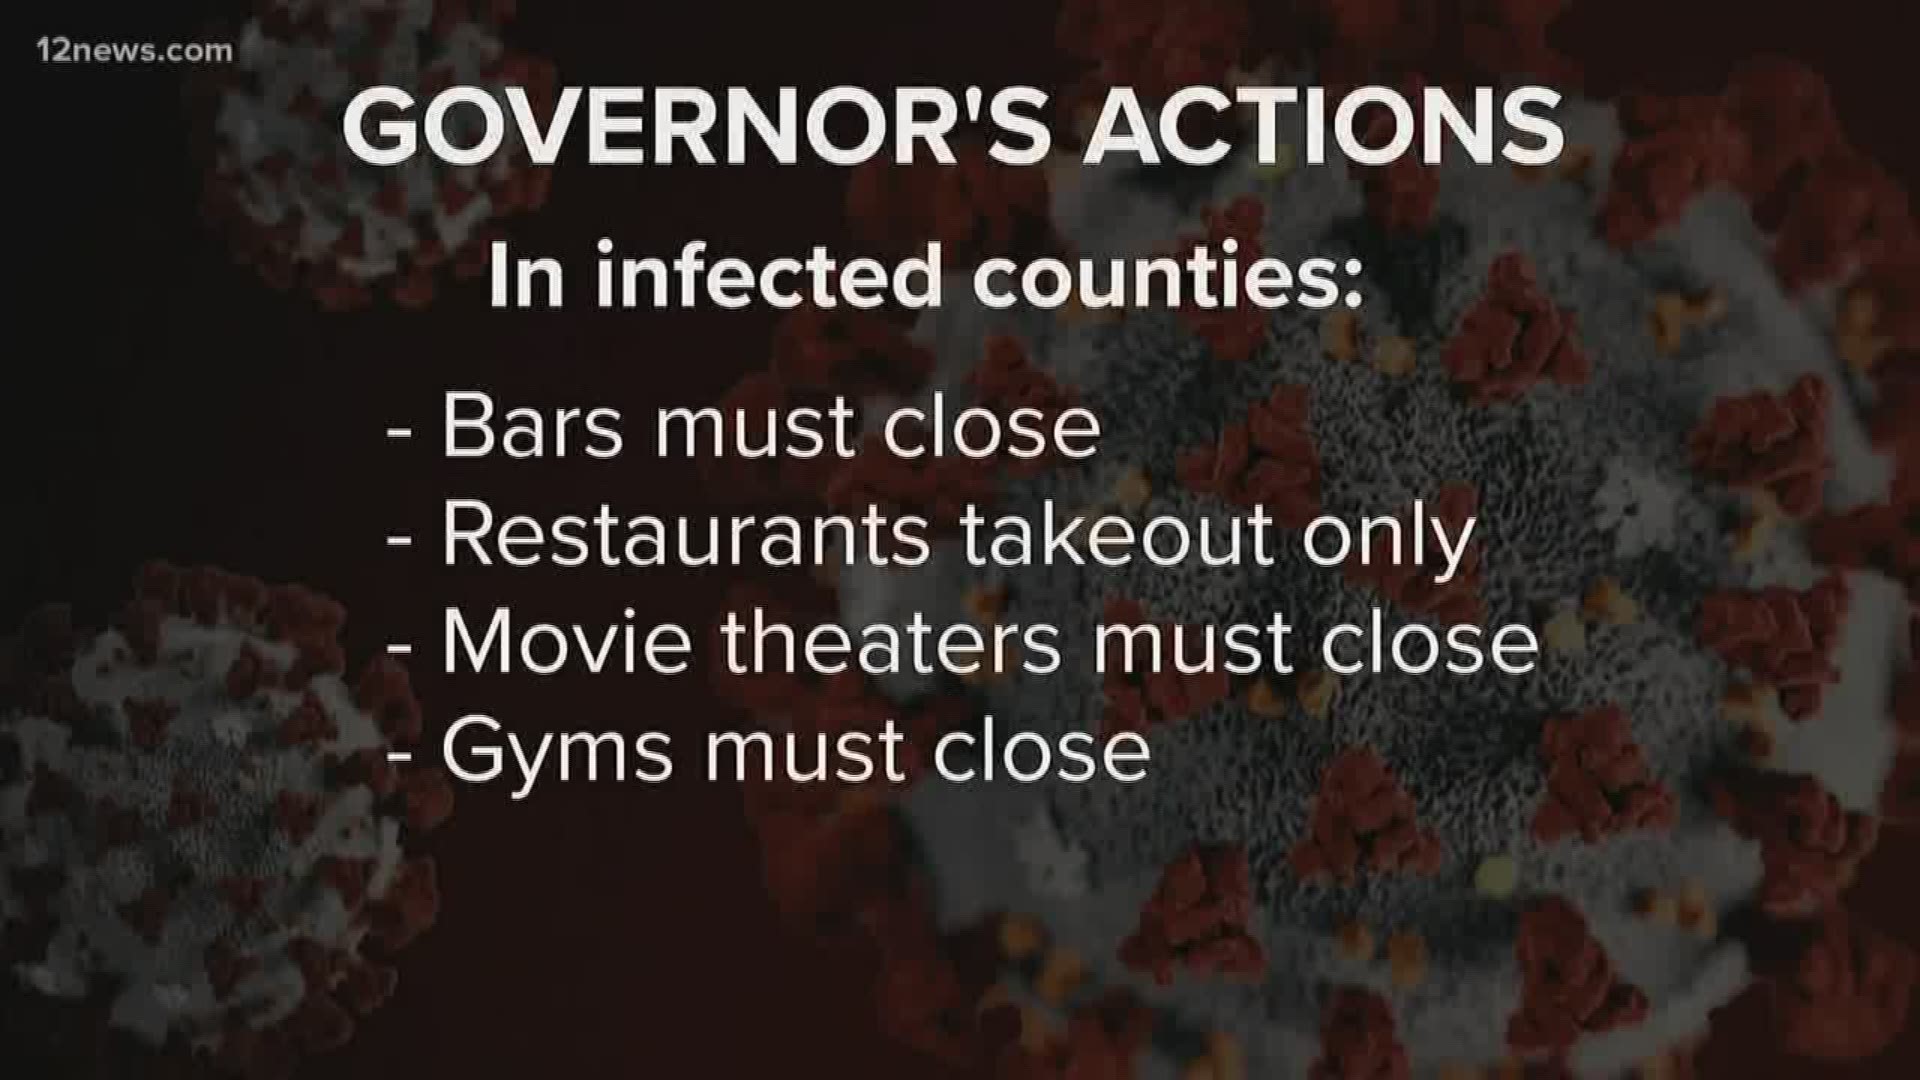 Gov. Doug Ducey announced he is issuing an executive order to implement changes statewide to slow the spread of the coronavirus.